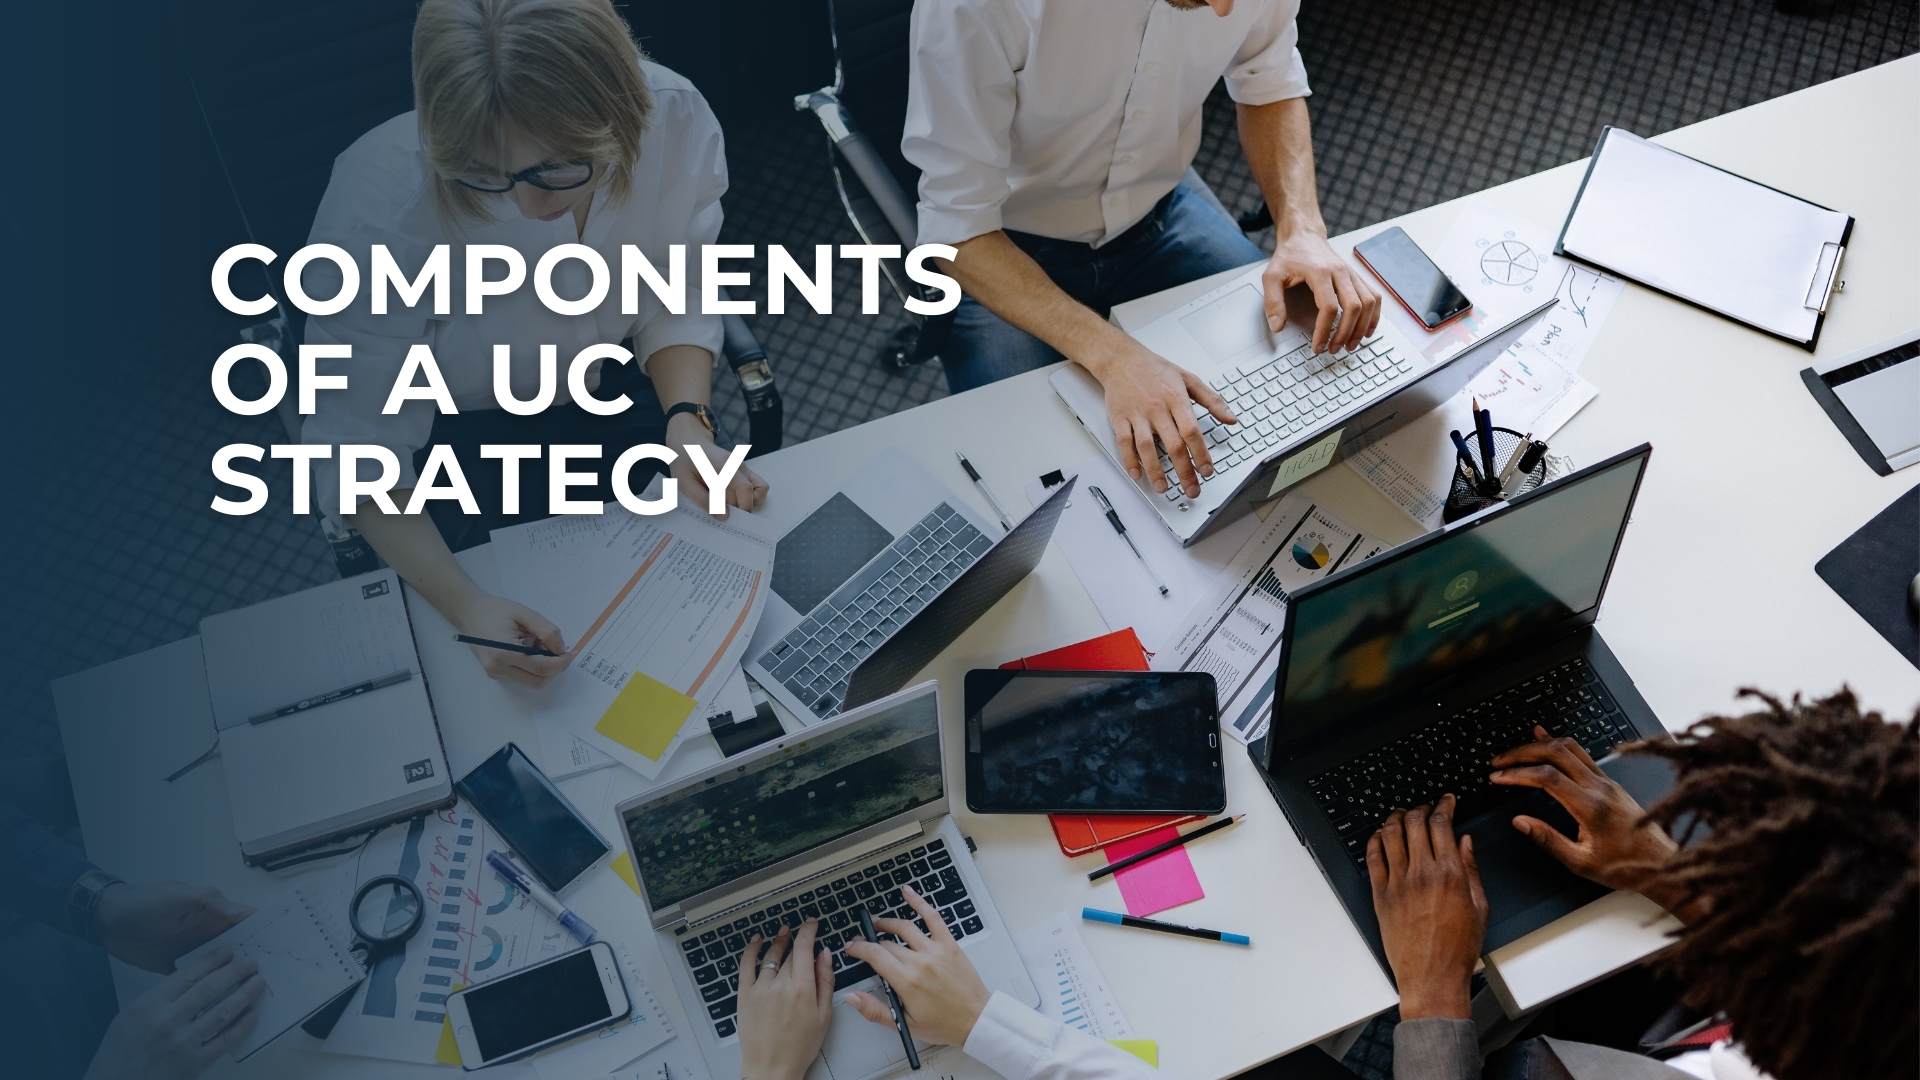 Components of a UC Strategy